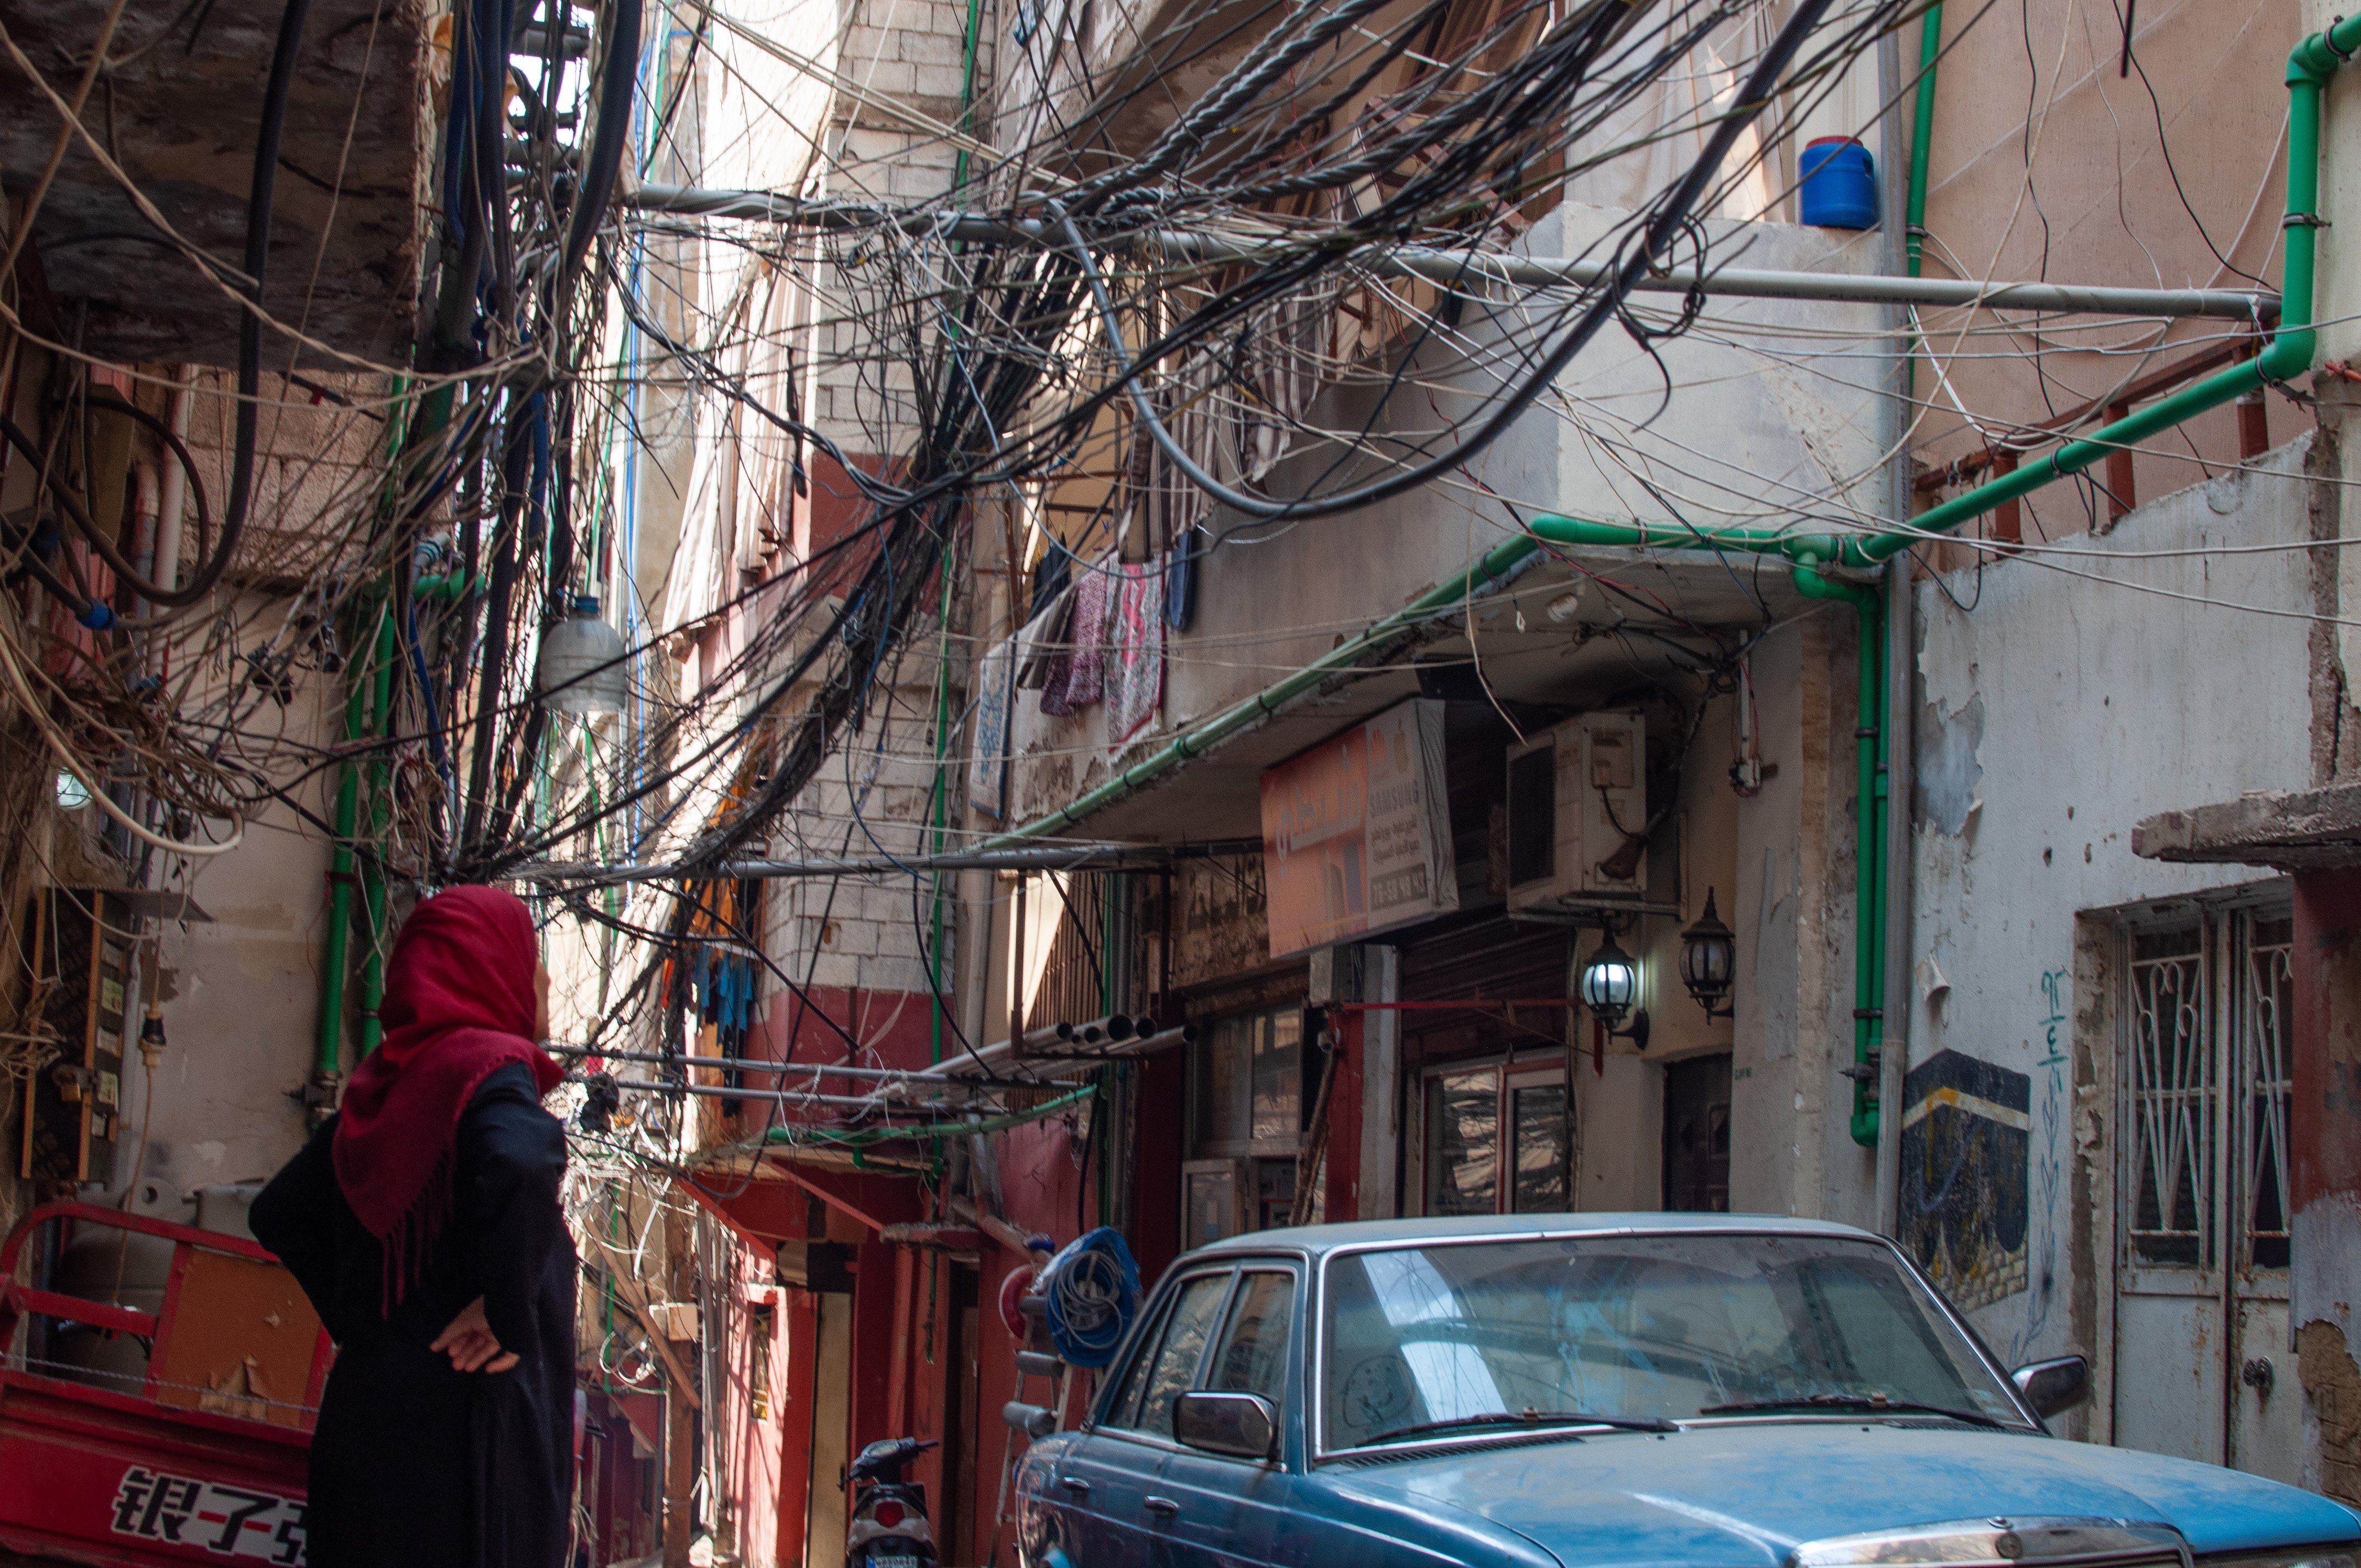 The suburbs of Beirut, the region of the Burj Barajneh refugee camp, photo: PAH